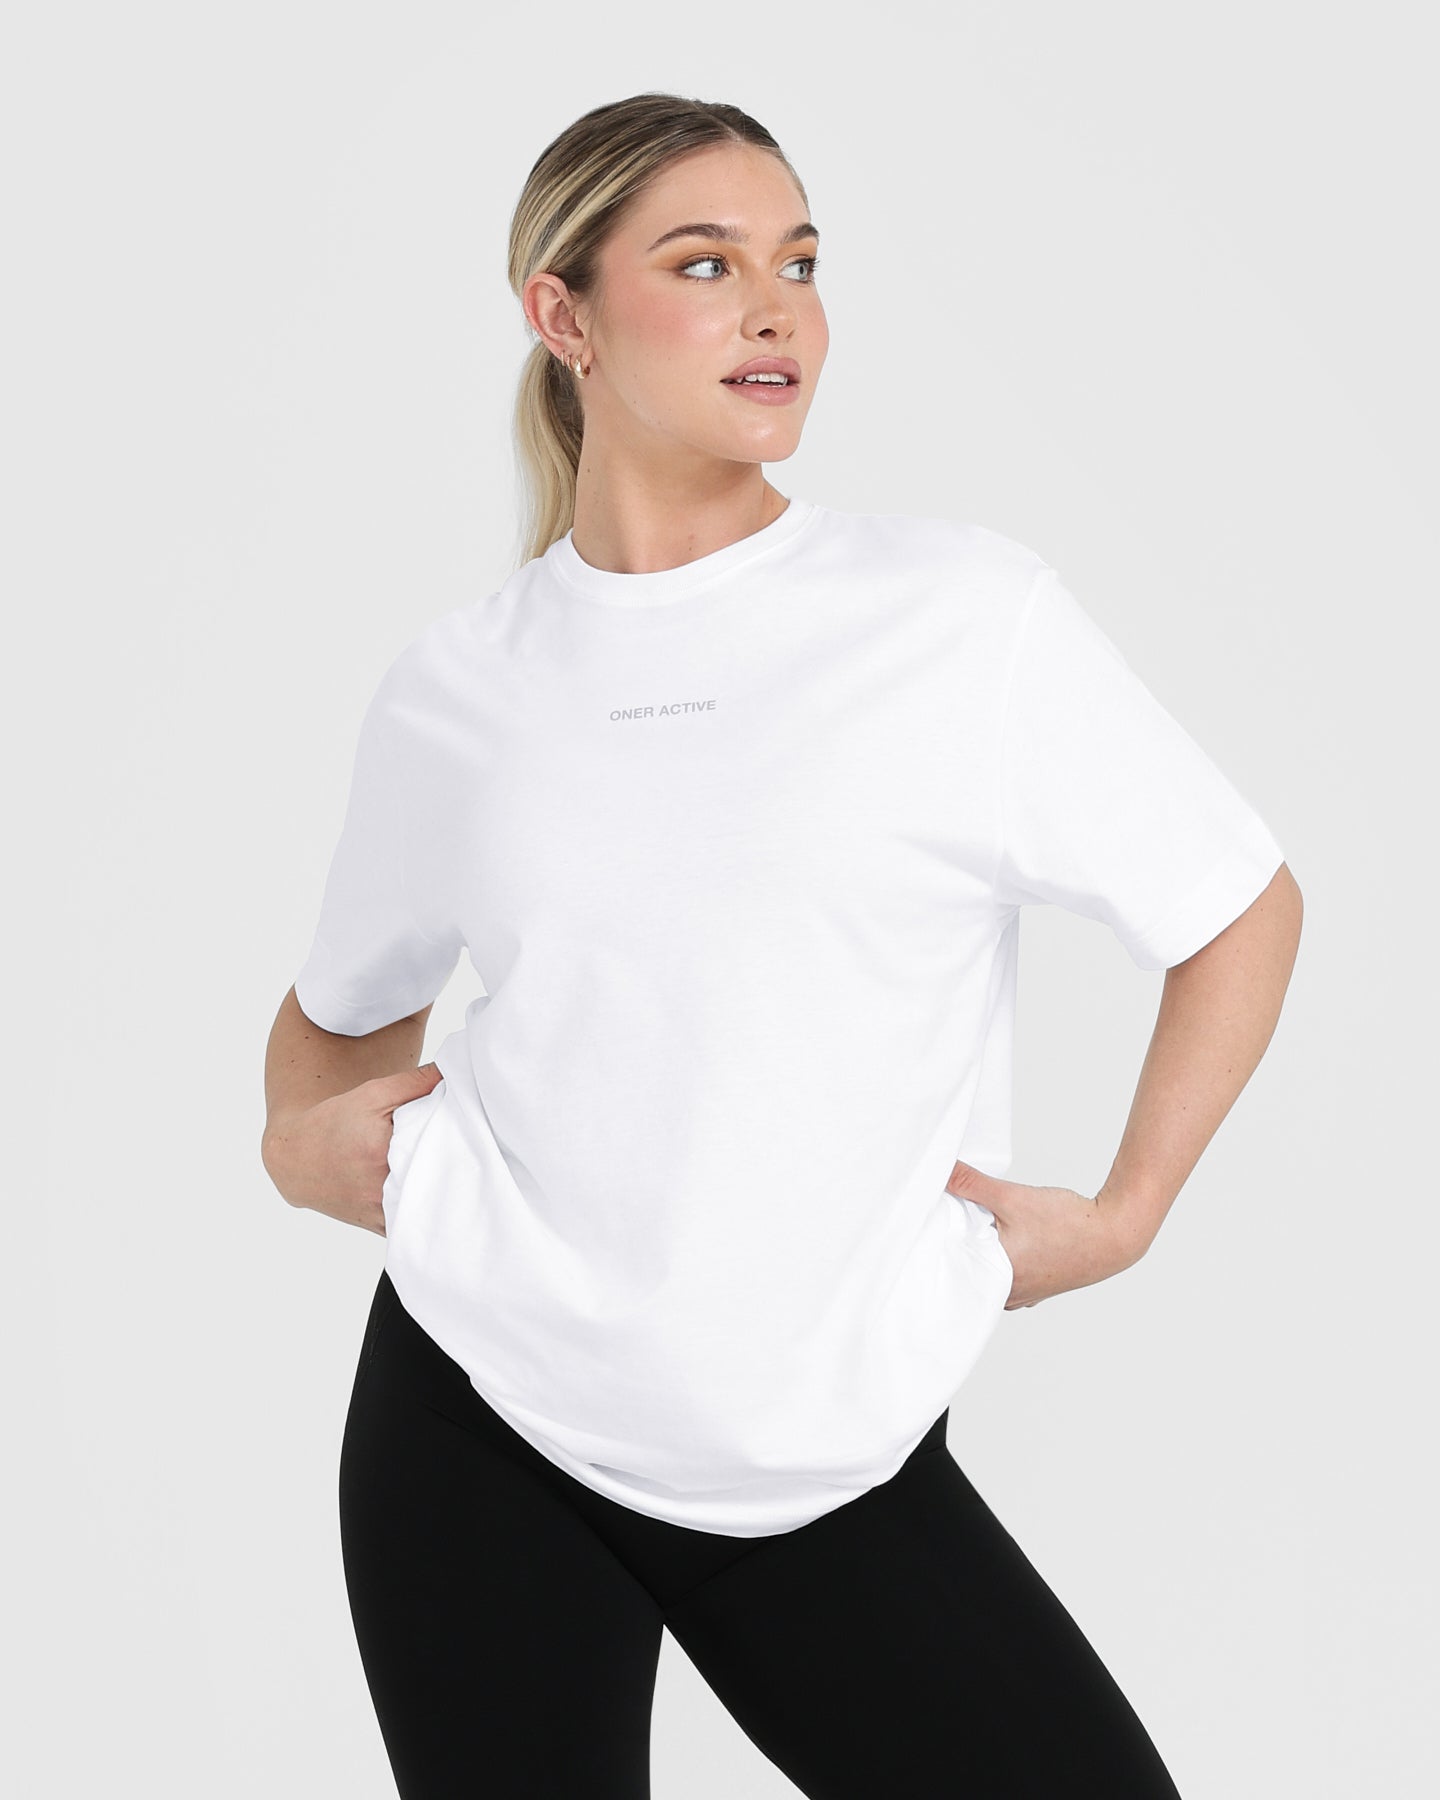 White Oversized T-Shirt Women's - Soft Touch Cotton | Oner Active